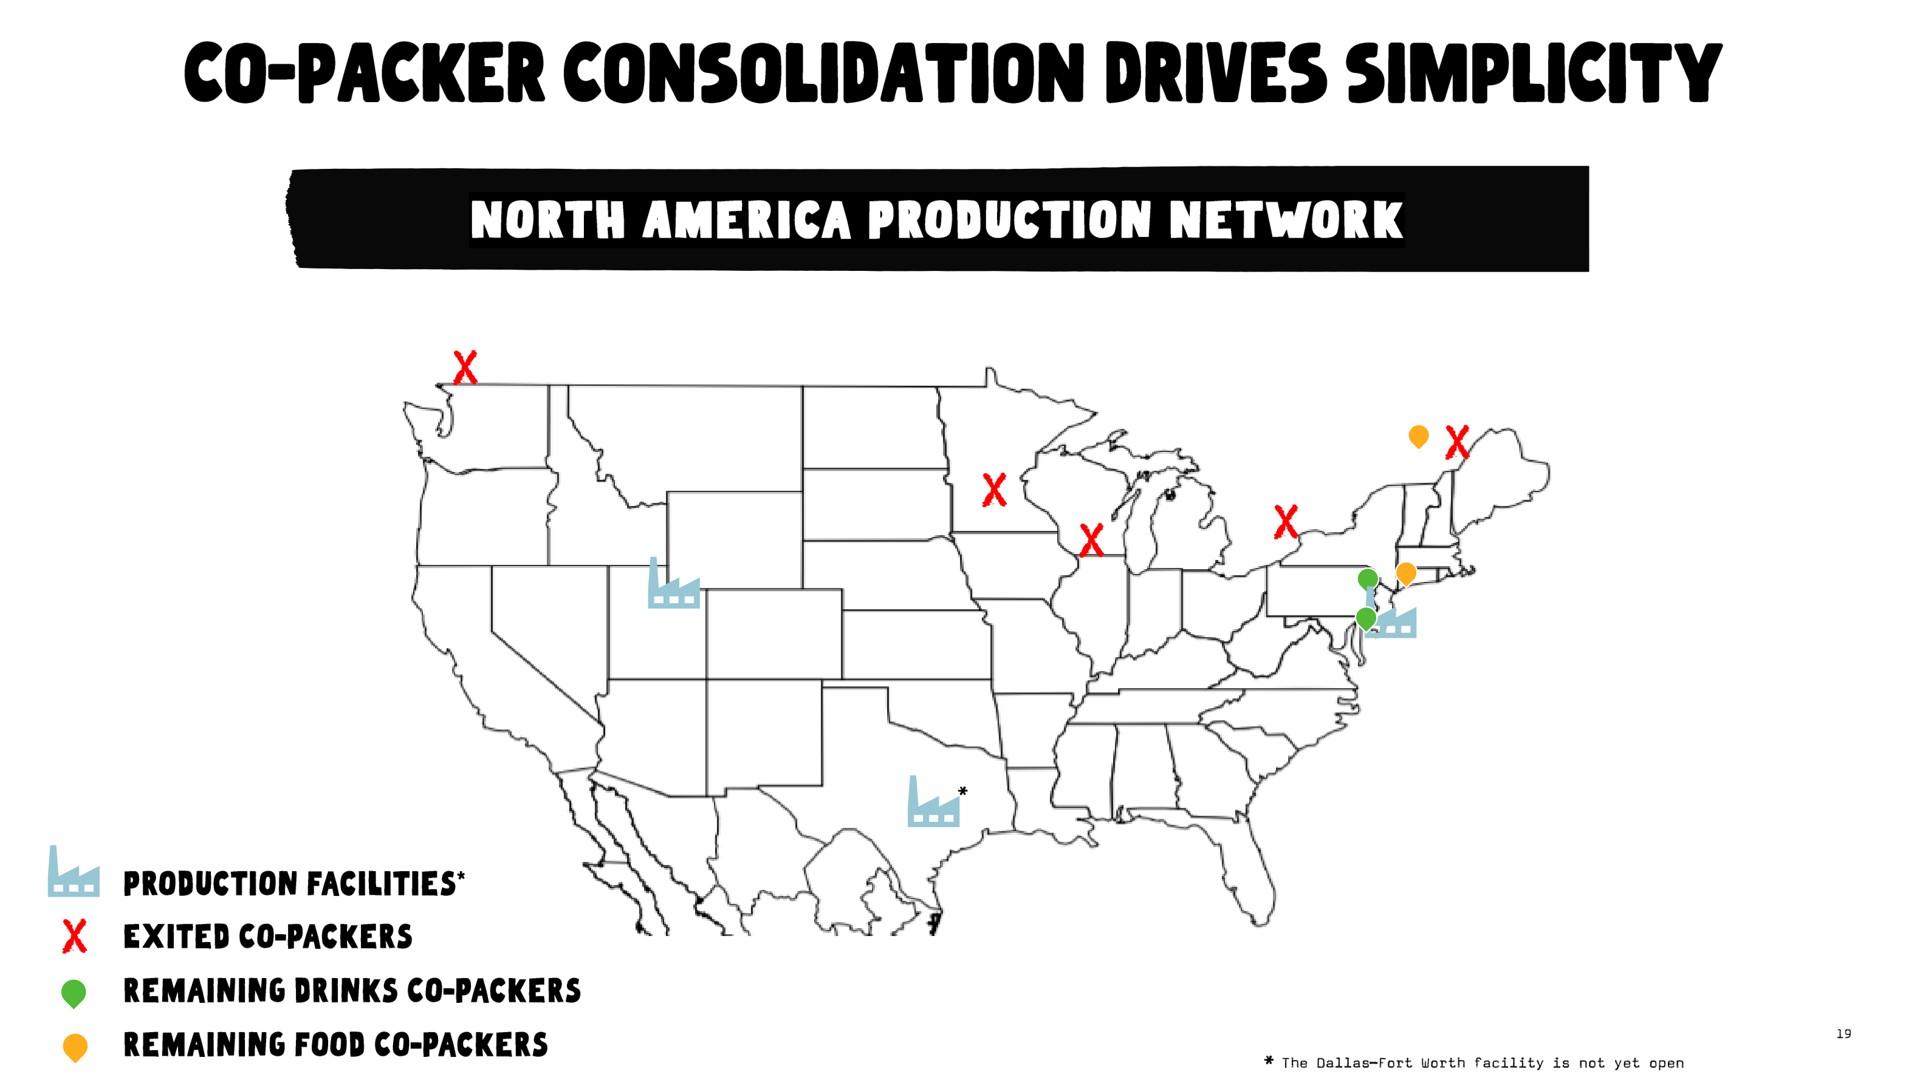 packer consolidation drives simplicity uss | Oatly